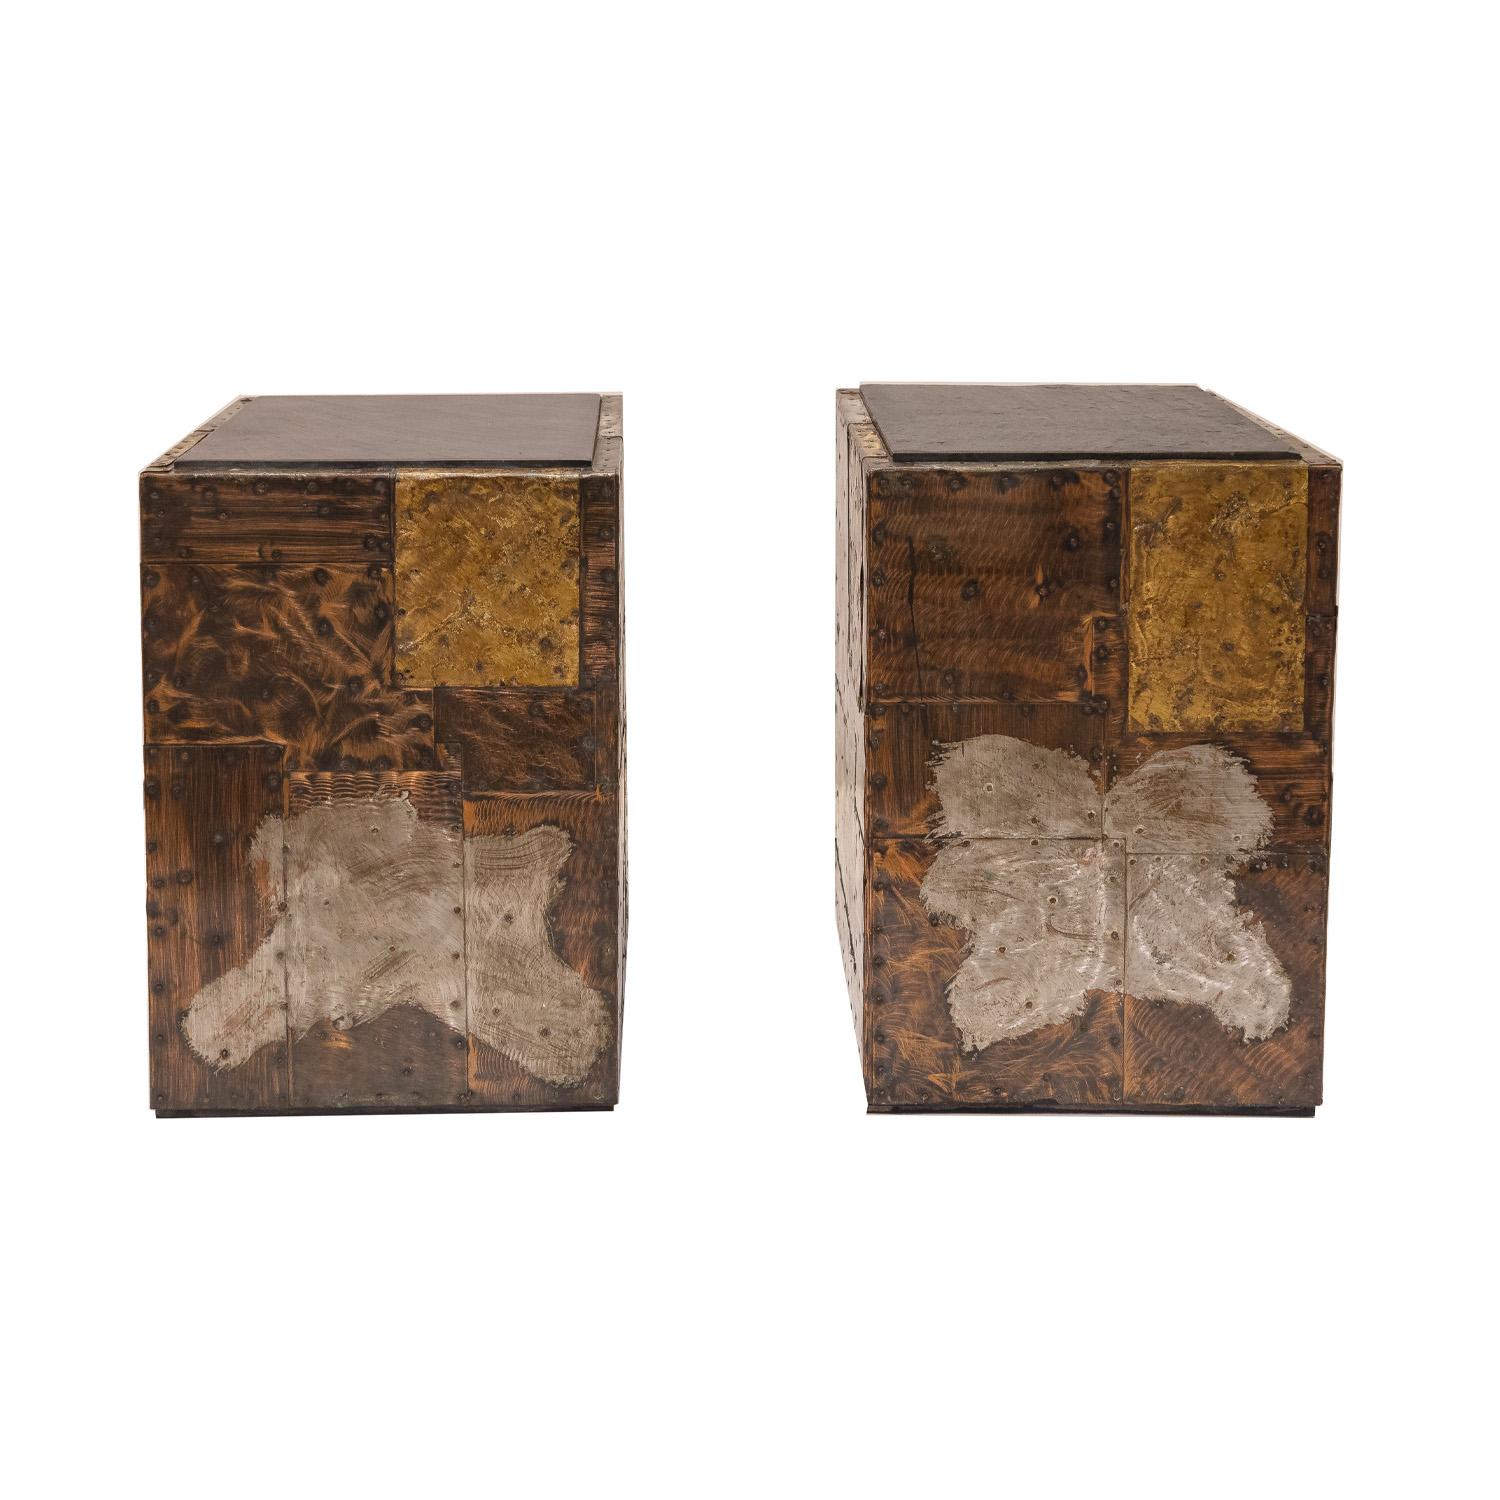 Pair of artisan Patchwork Cube occasional tables in pewter, copper and bronze with inset natural cleft slate tops by Paul Evans Studio for Directional Furniture, 1960's. These hand-crafted tables are stunning and in superb condition. Slate has been